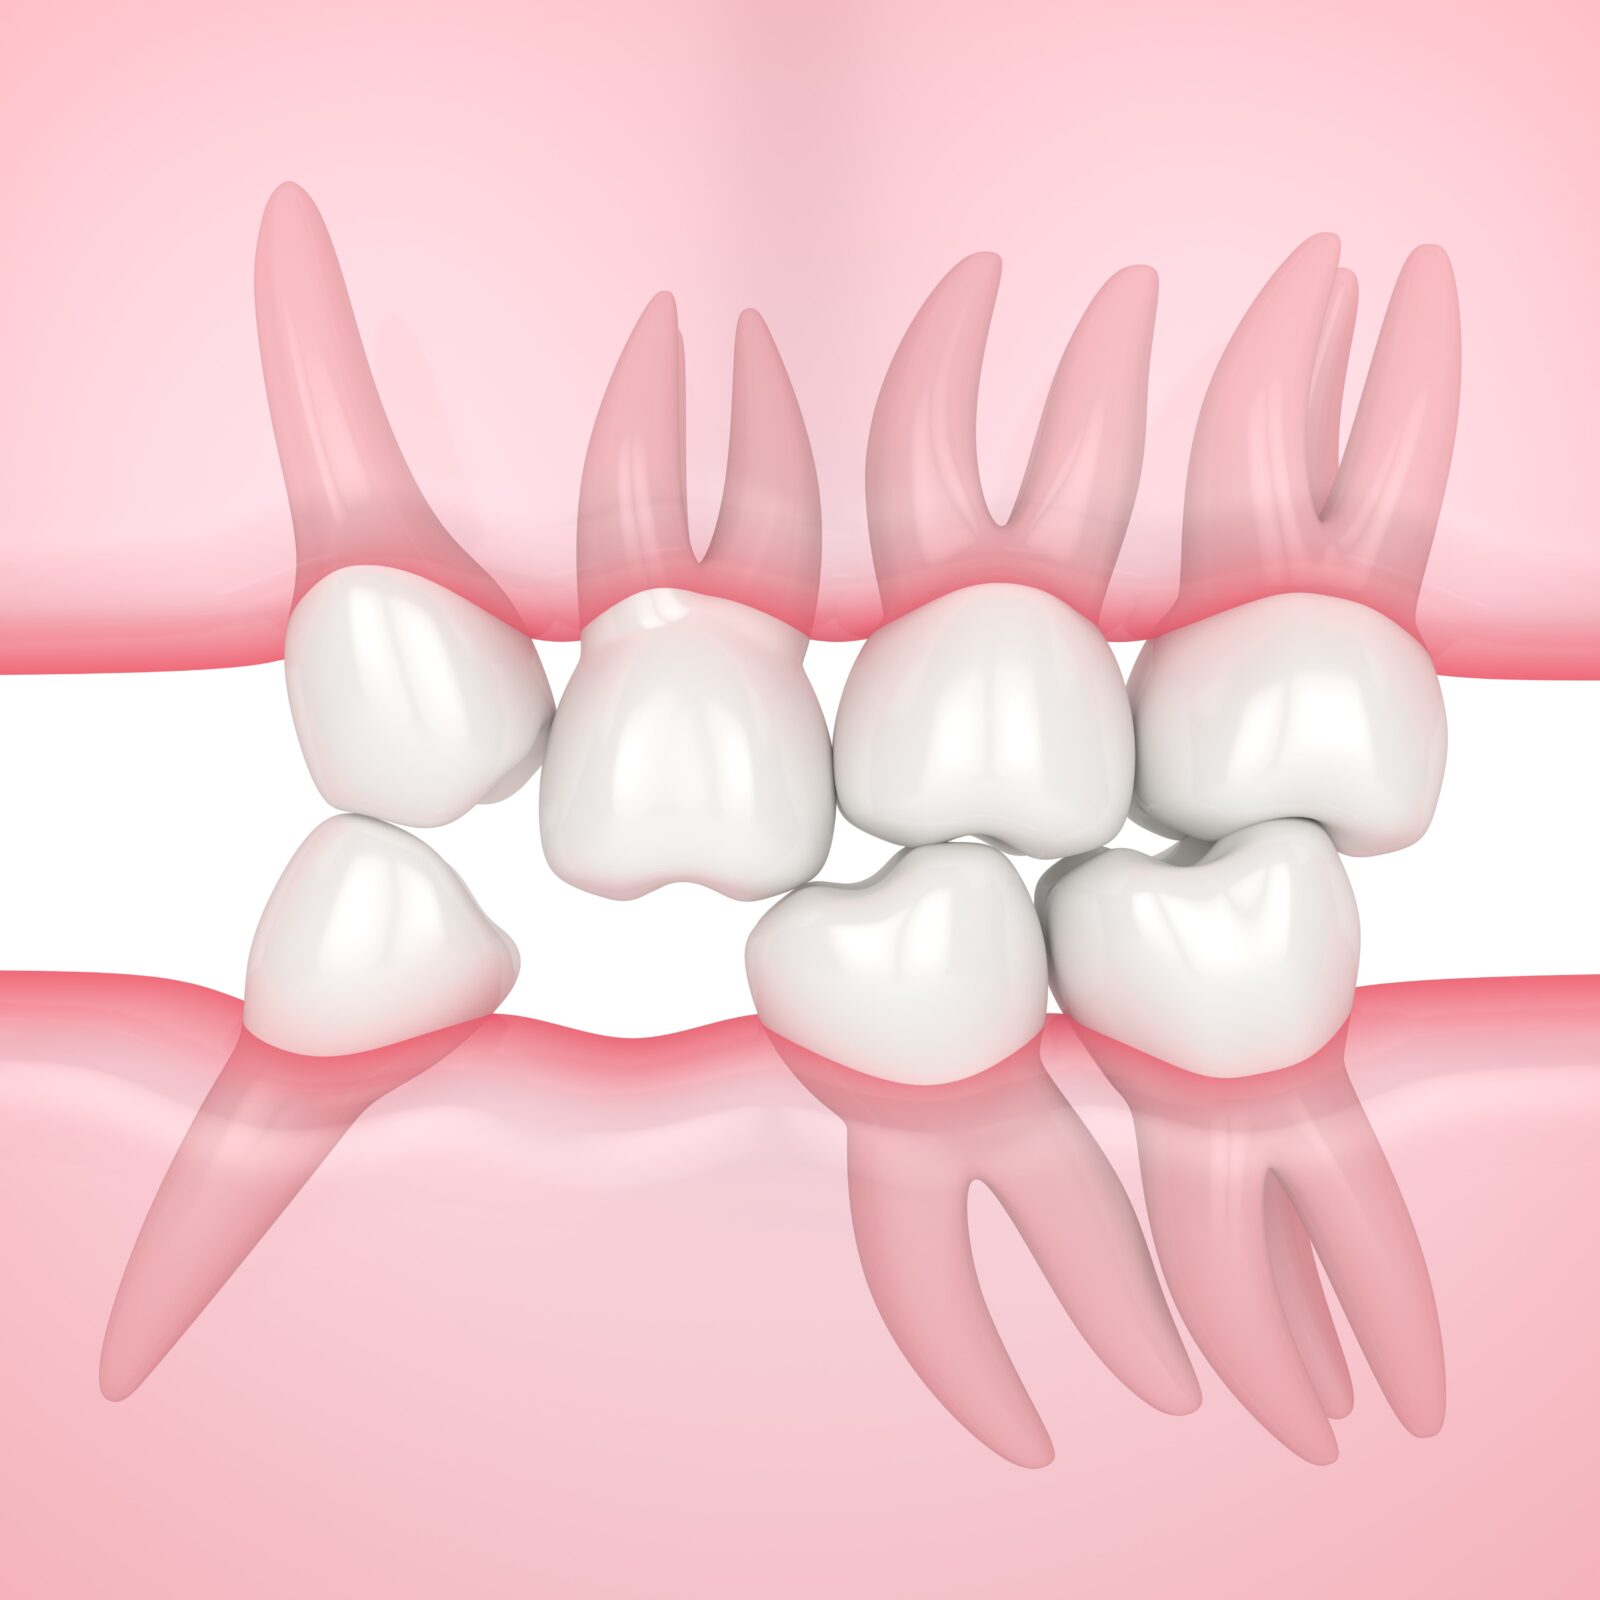 problems caused by missing teeth